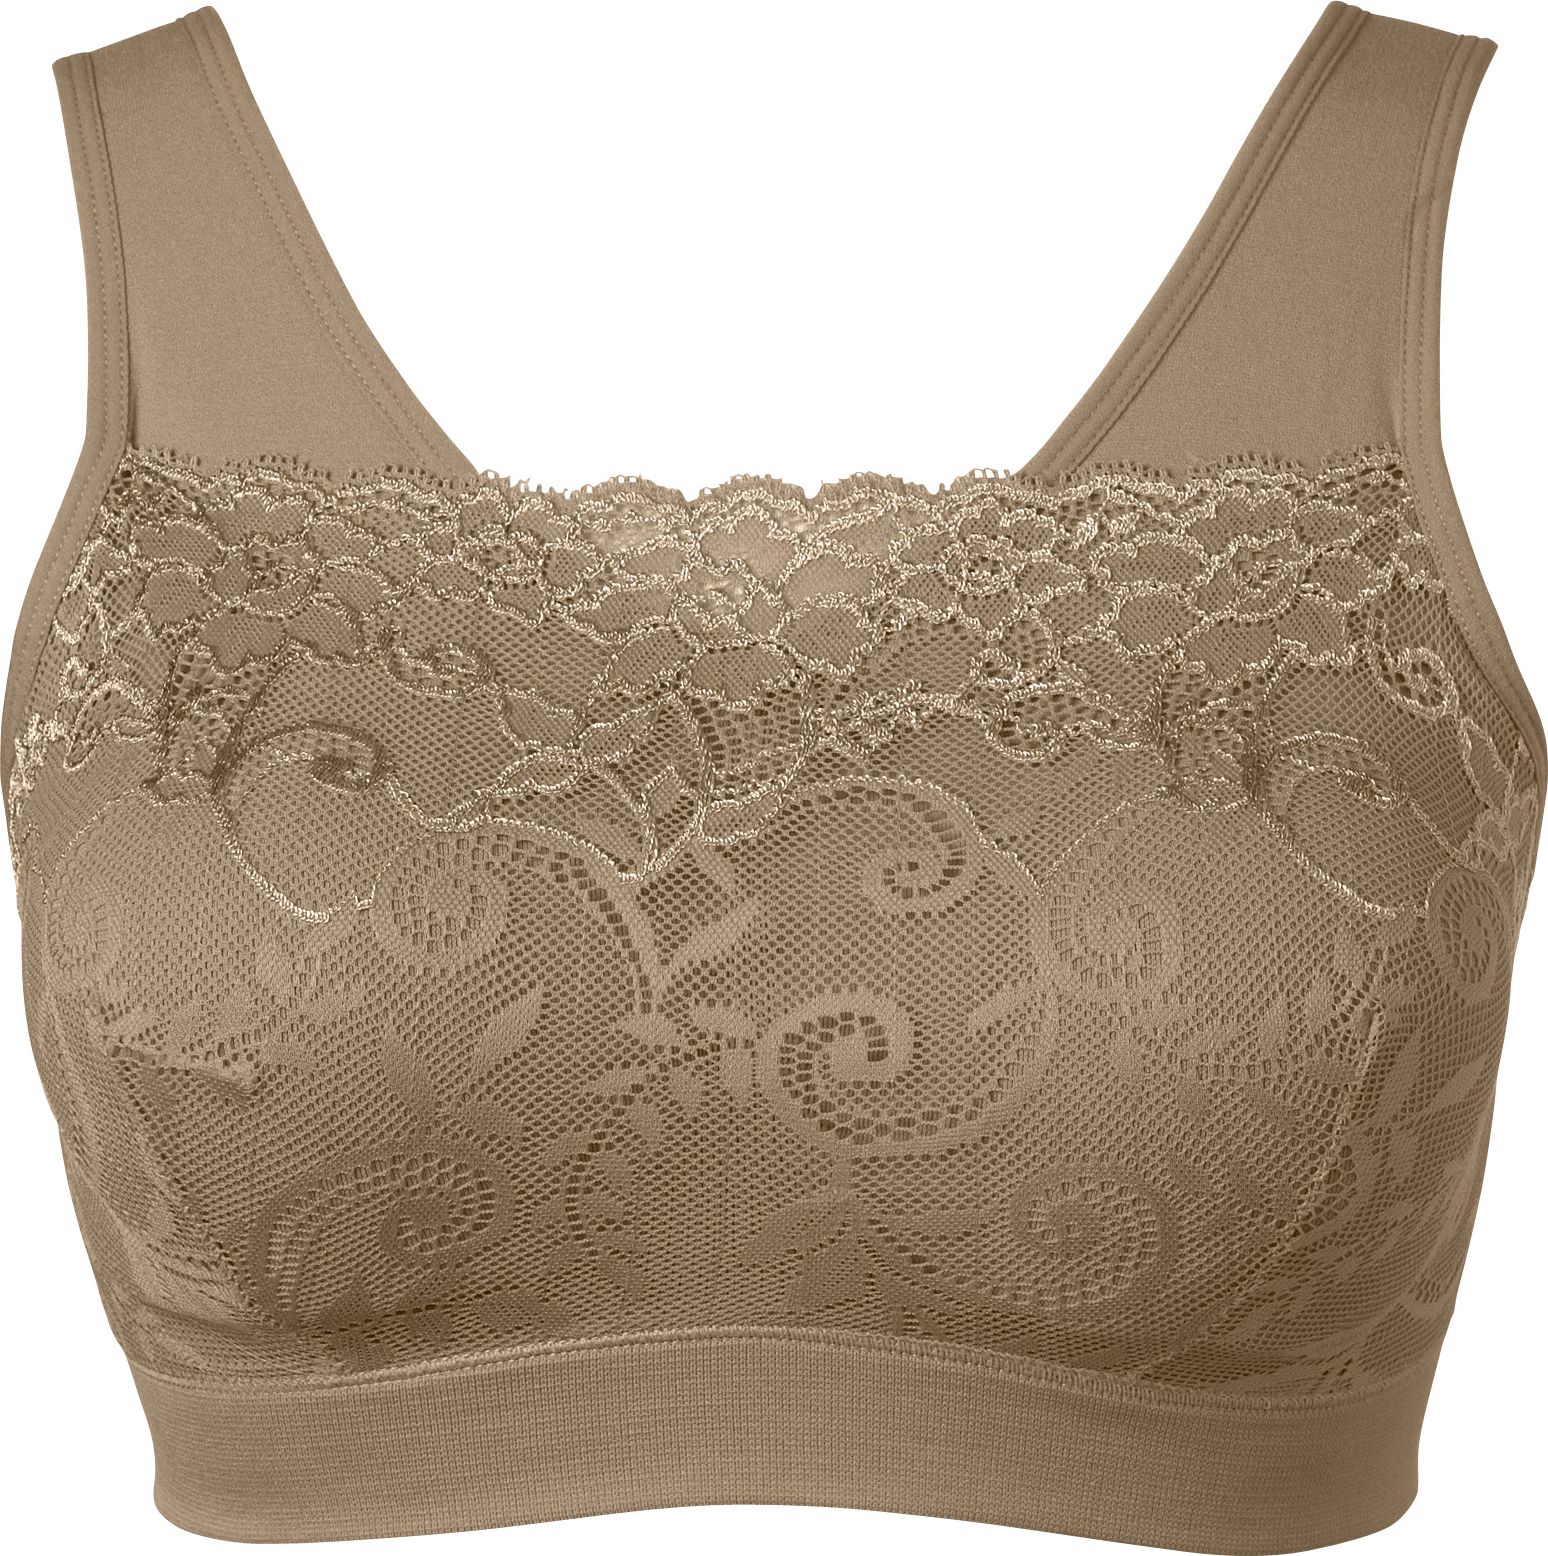 Bra Classic 124930 (2 nude colors) from Milavitsa - buy in the online store.